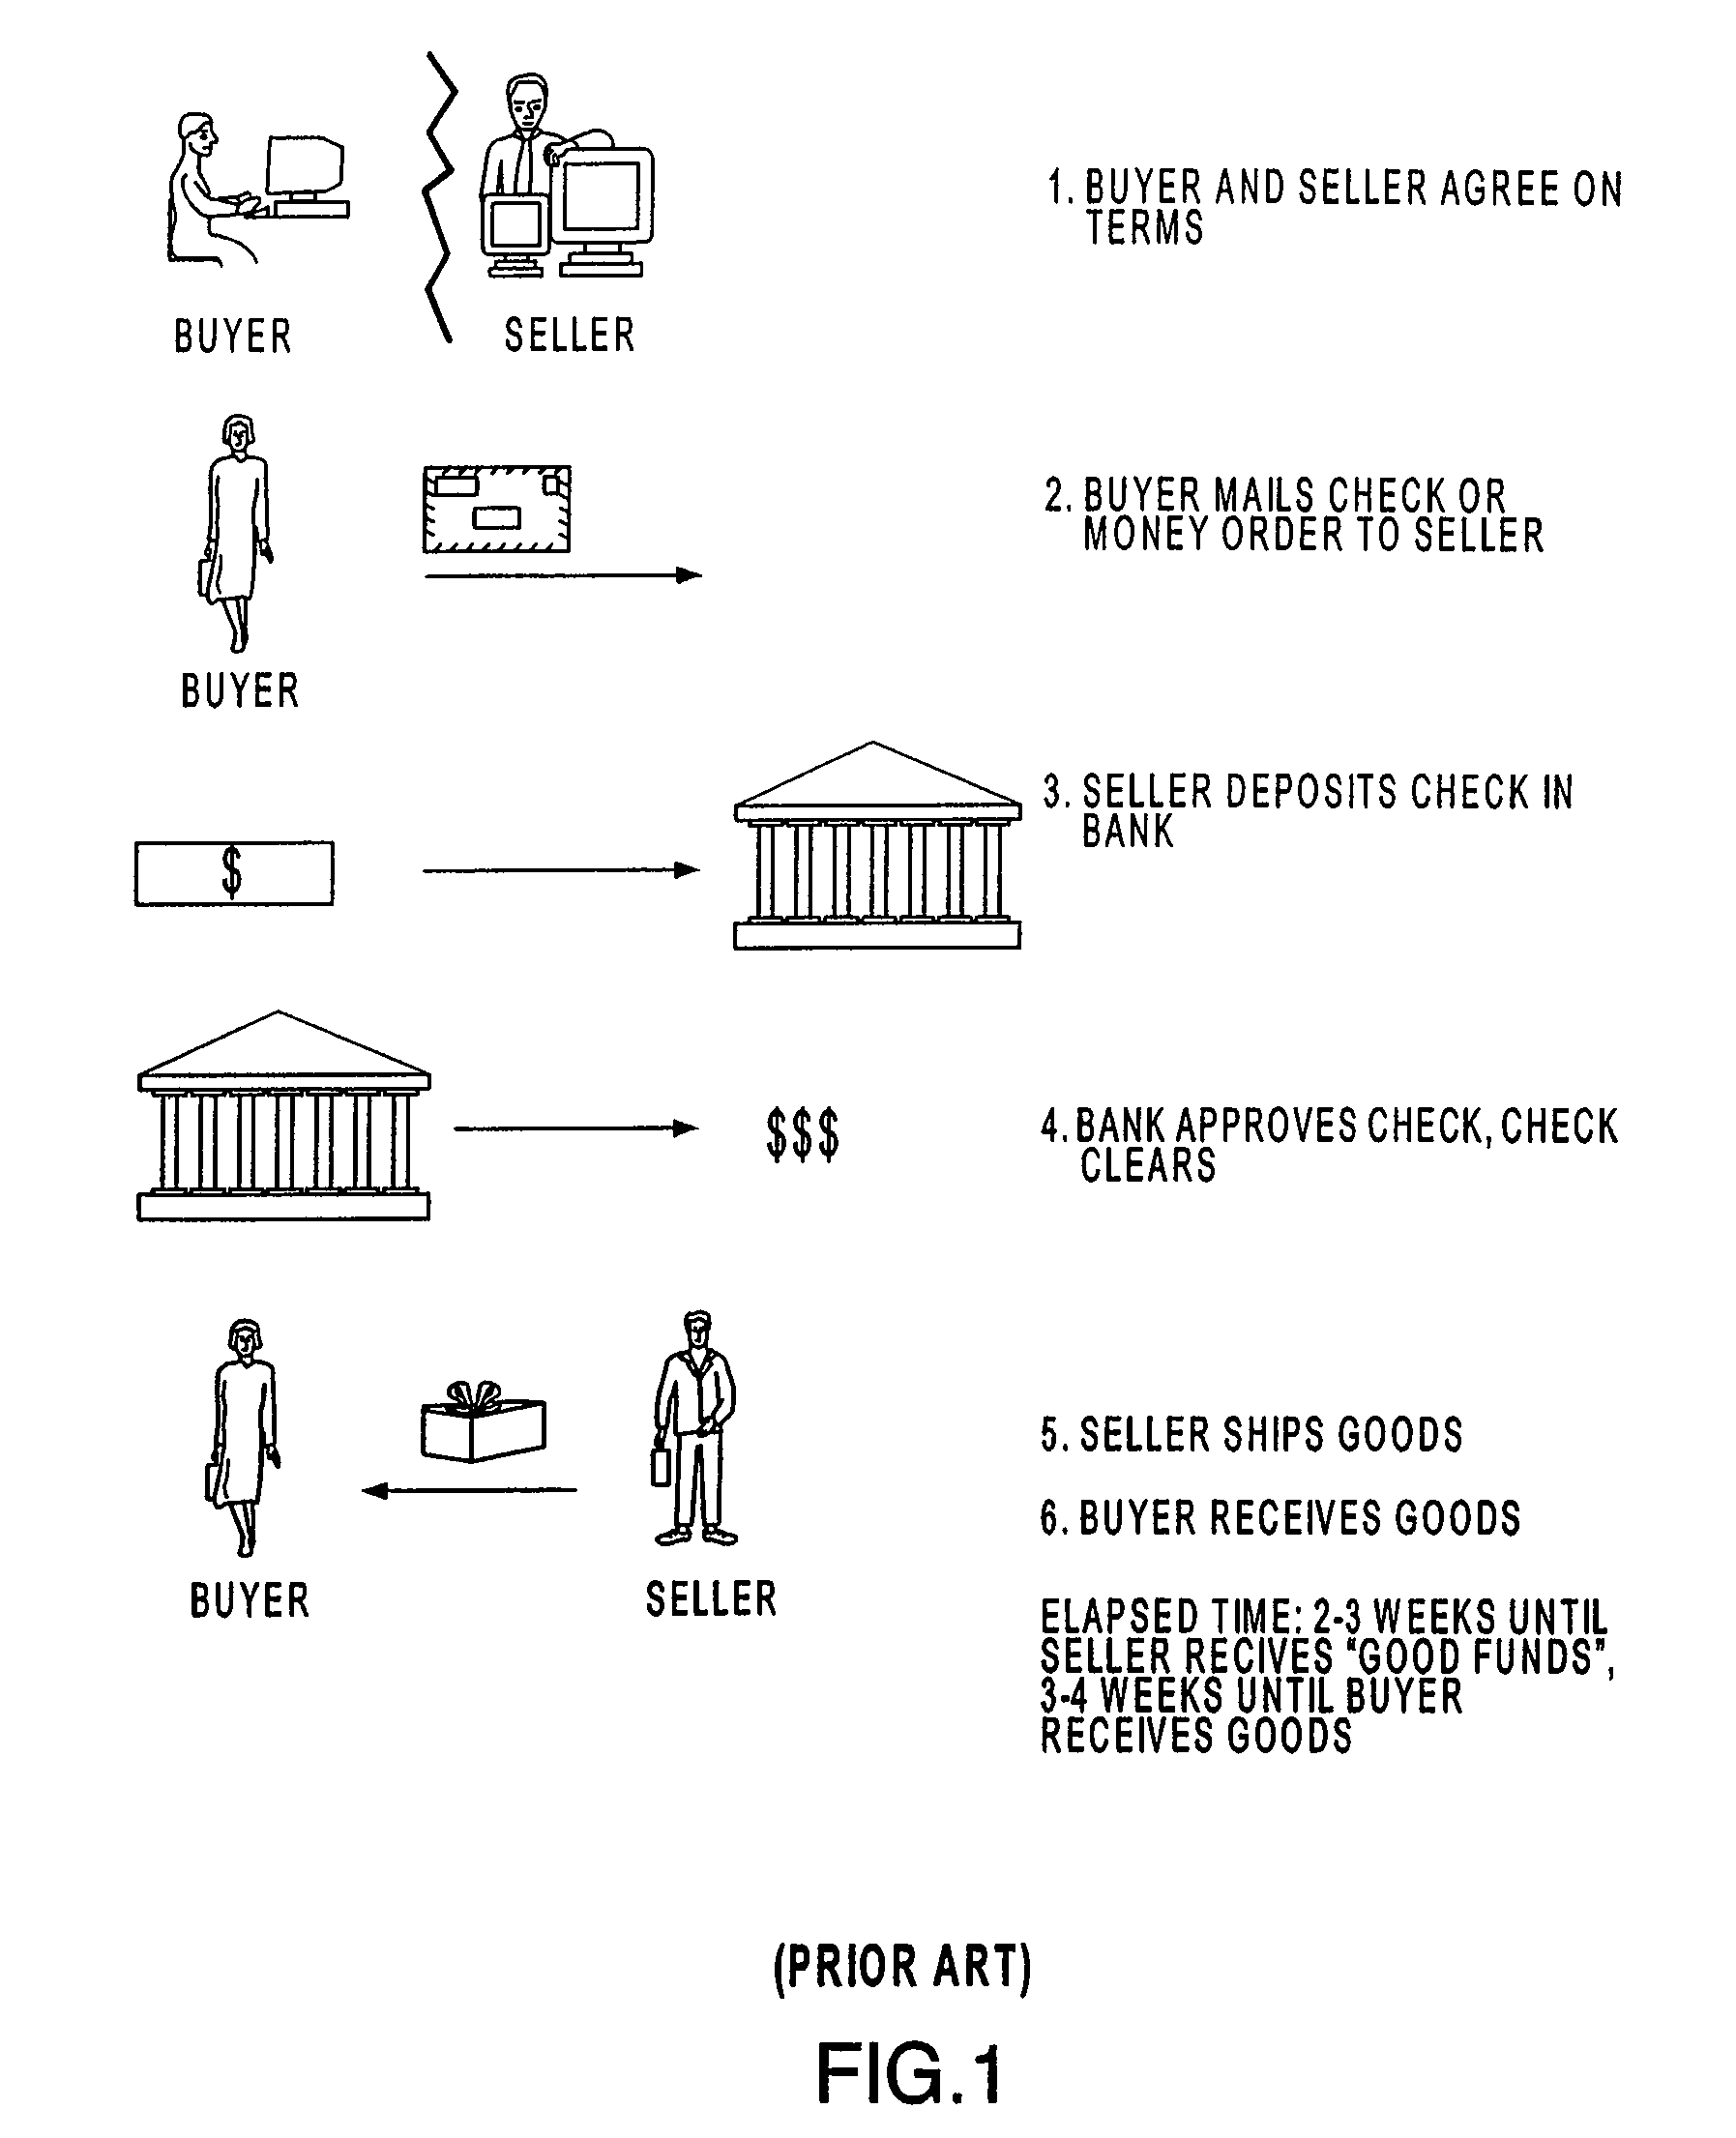 Systems and methods for facilitating transactions